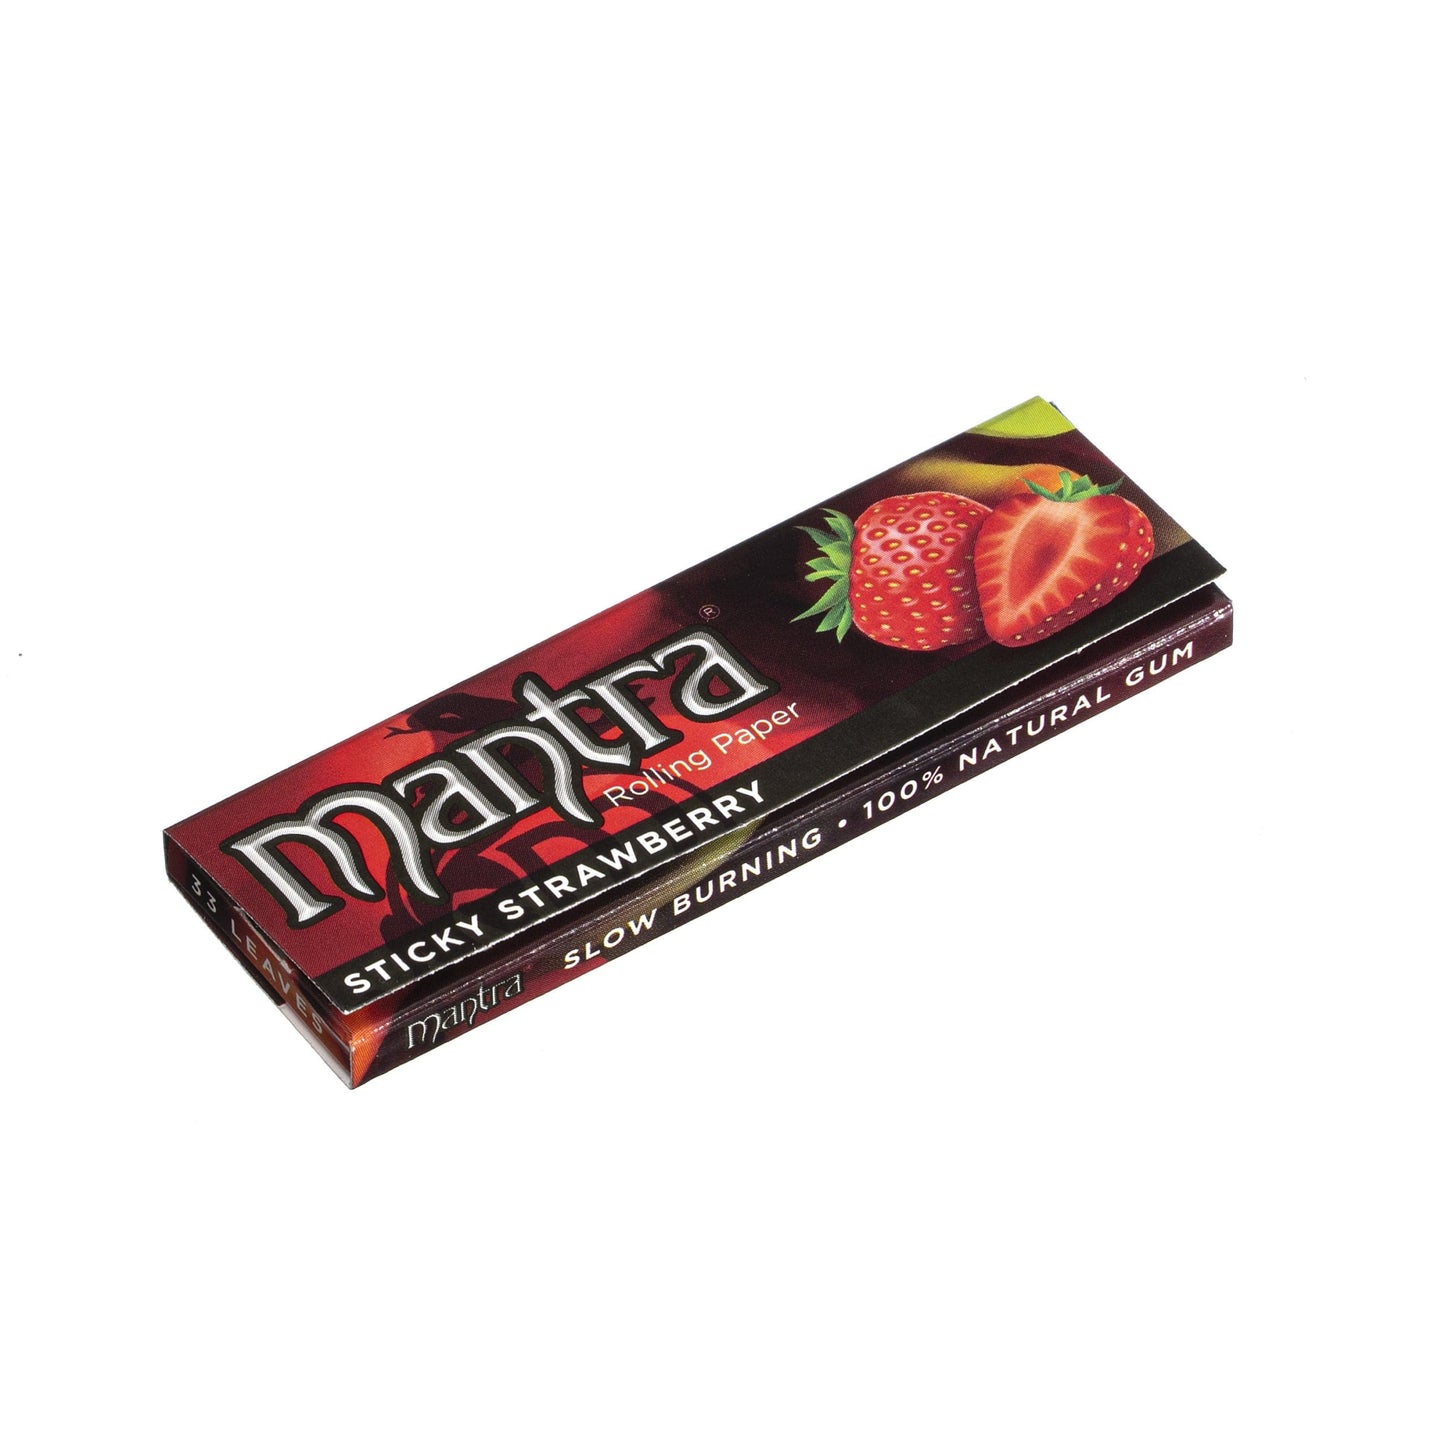 Mantra Flavored Rolling Paper Sticky Strawberry